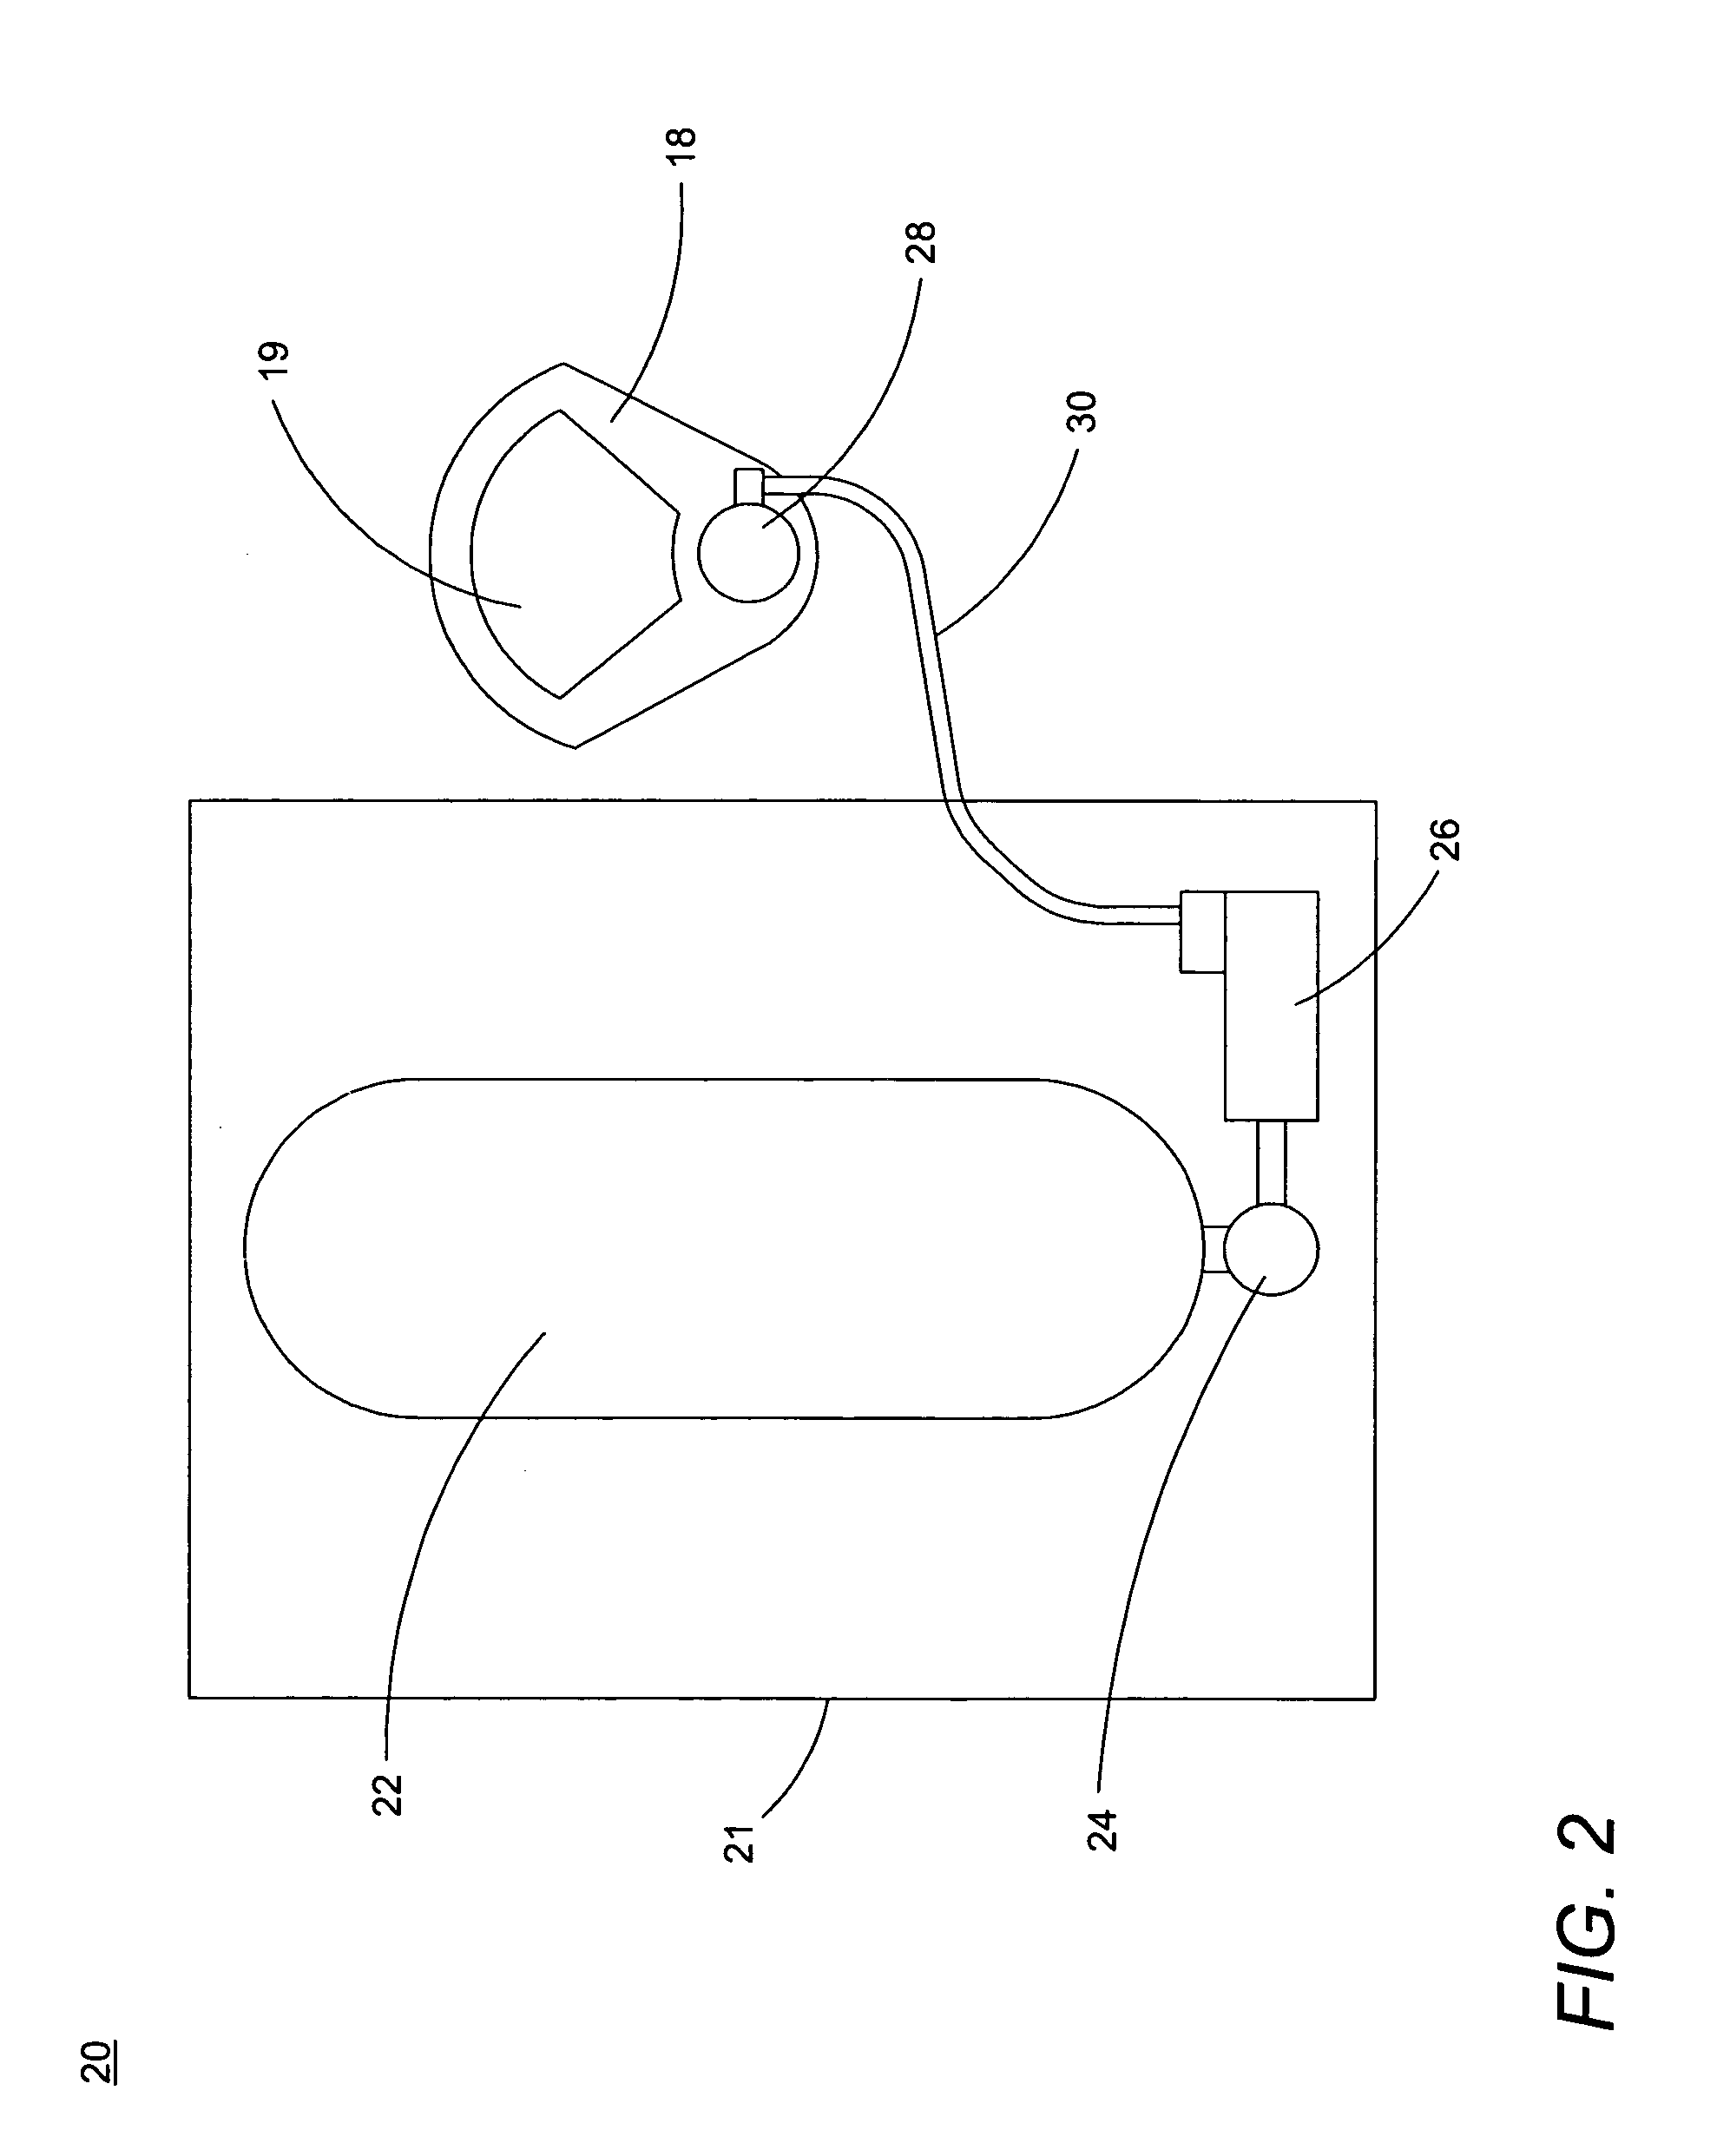 Portable air-purifying system utilizing enclosed filters